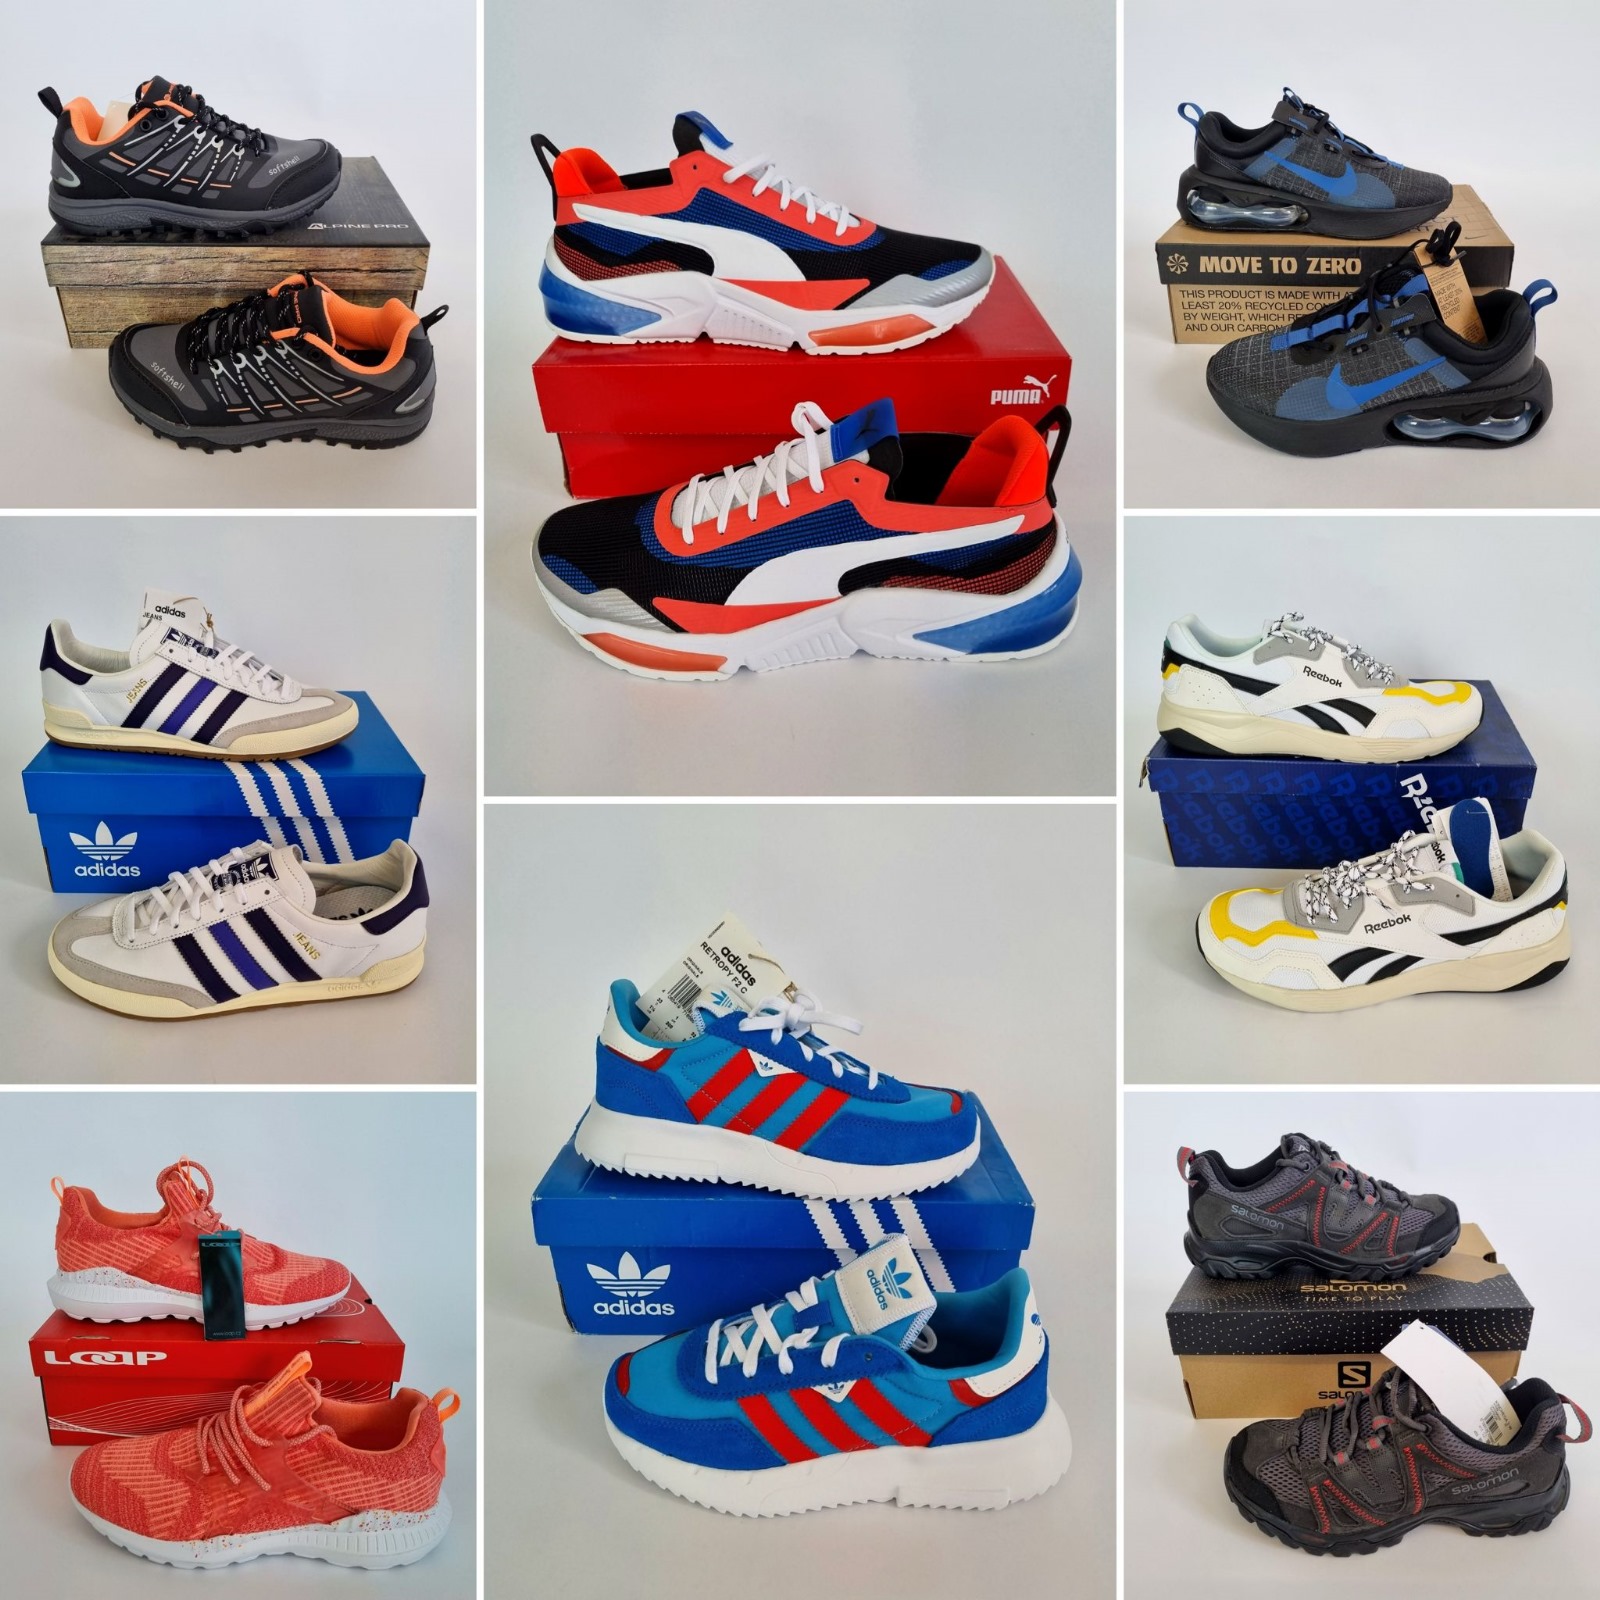 MIX of sports and branded footwear